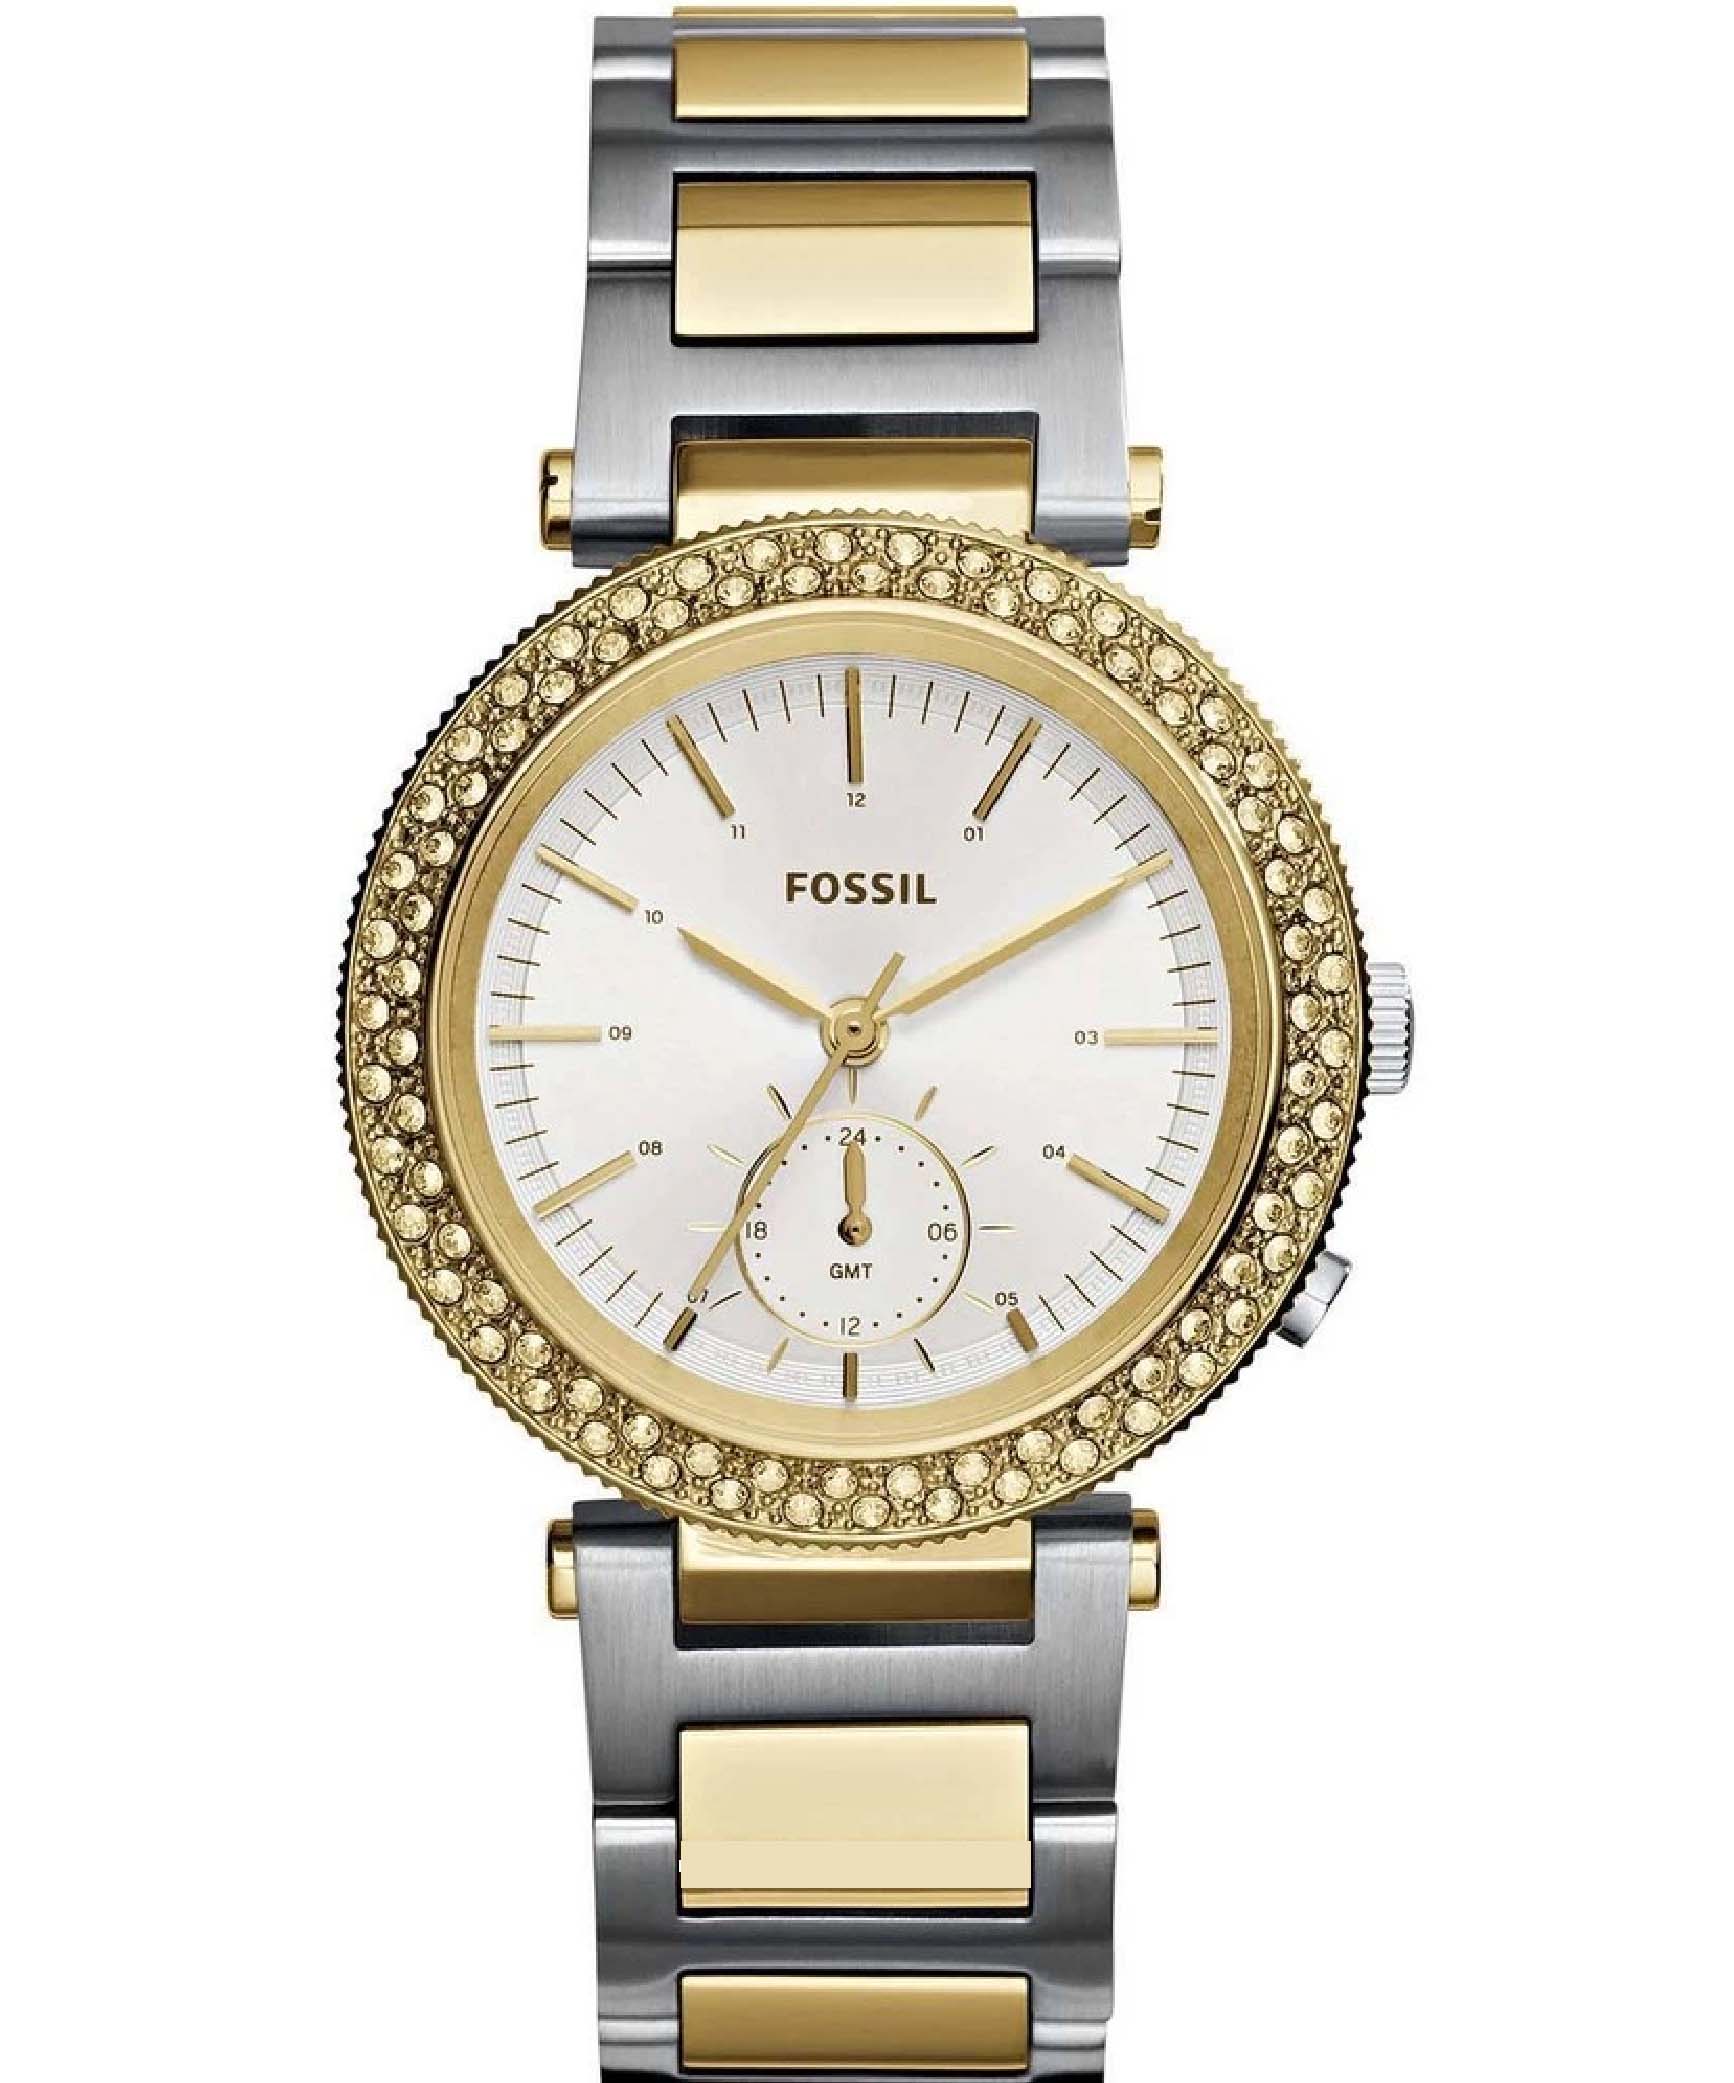 Fossil Women's Watch Analog, Urban Traveler Silver Dial Silver & Gold Stainless Steel Band, FW-ES3850